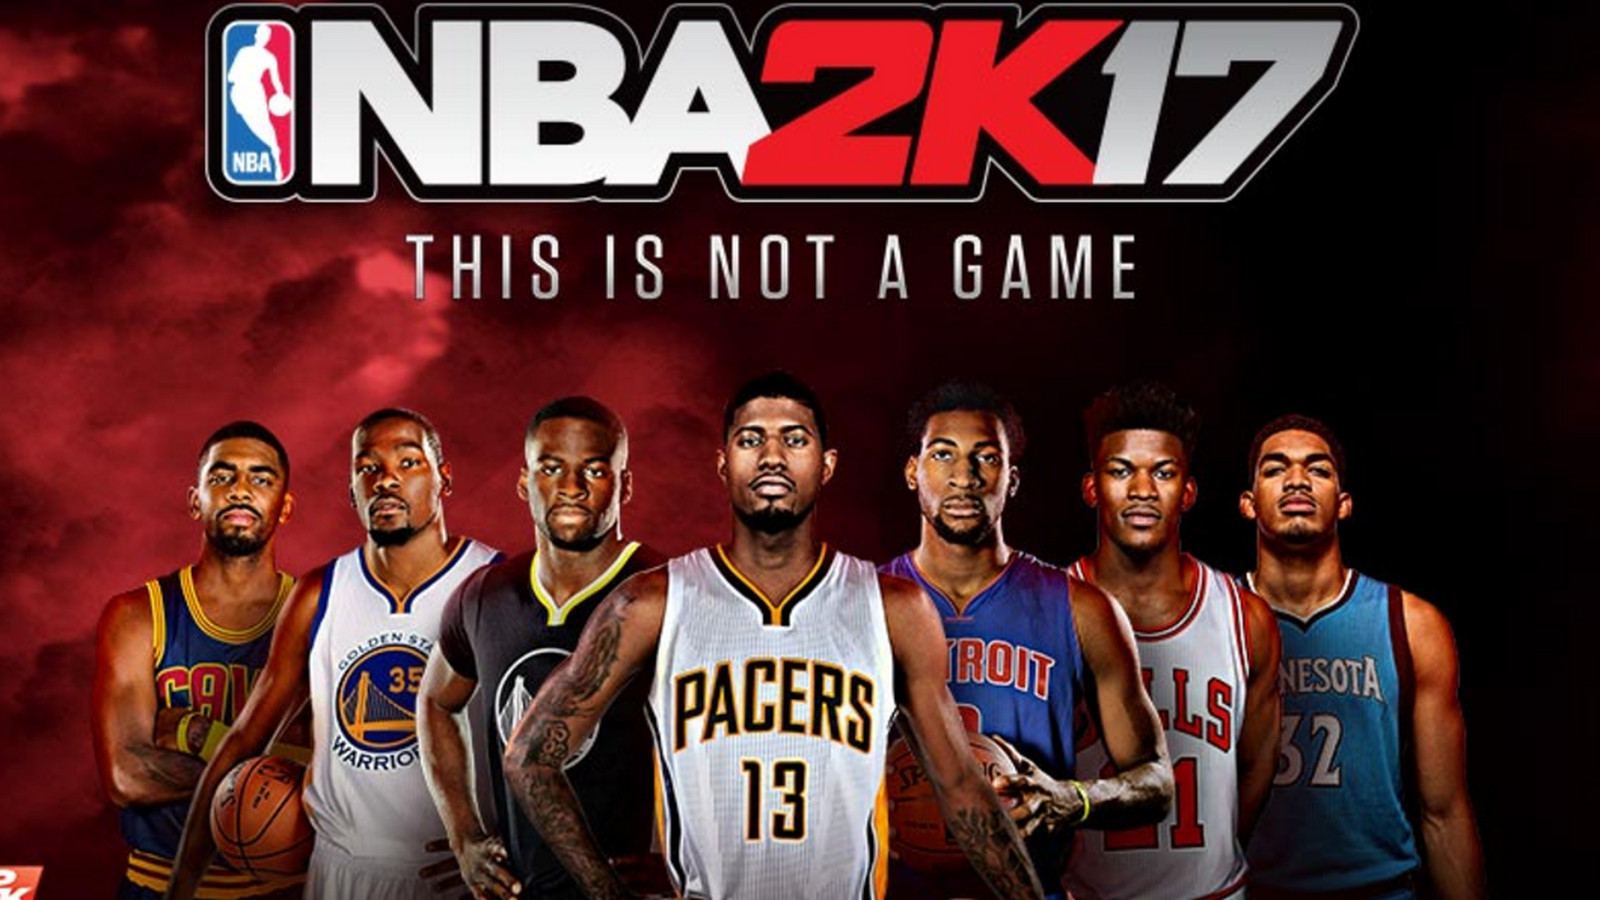 Nba 2k17 Release Ratings And Andre Drummond In A